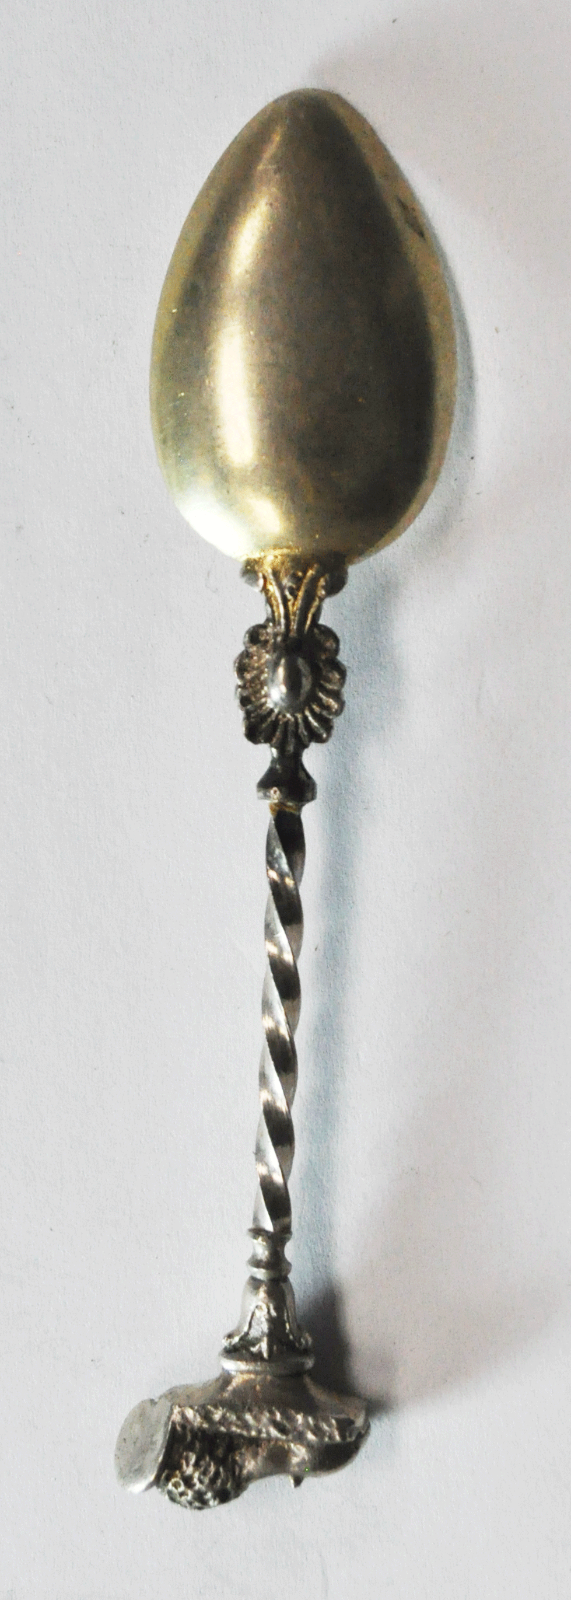 Silver Plated Gold Wash Laying Lion Twist Handle Souvenir Spoon 4-3/8"